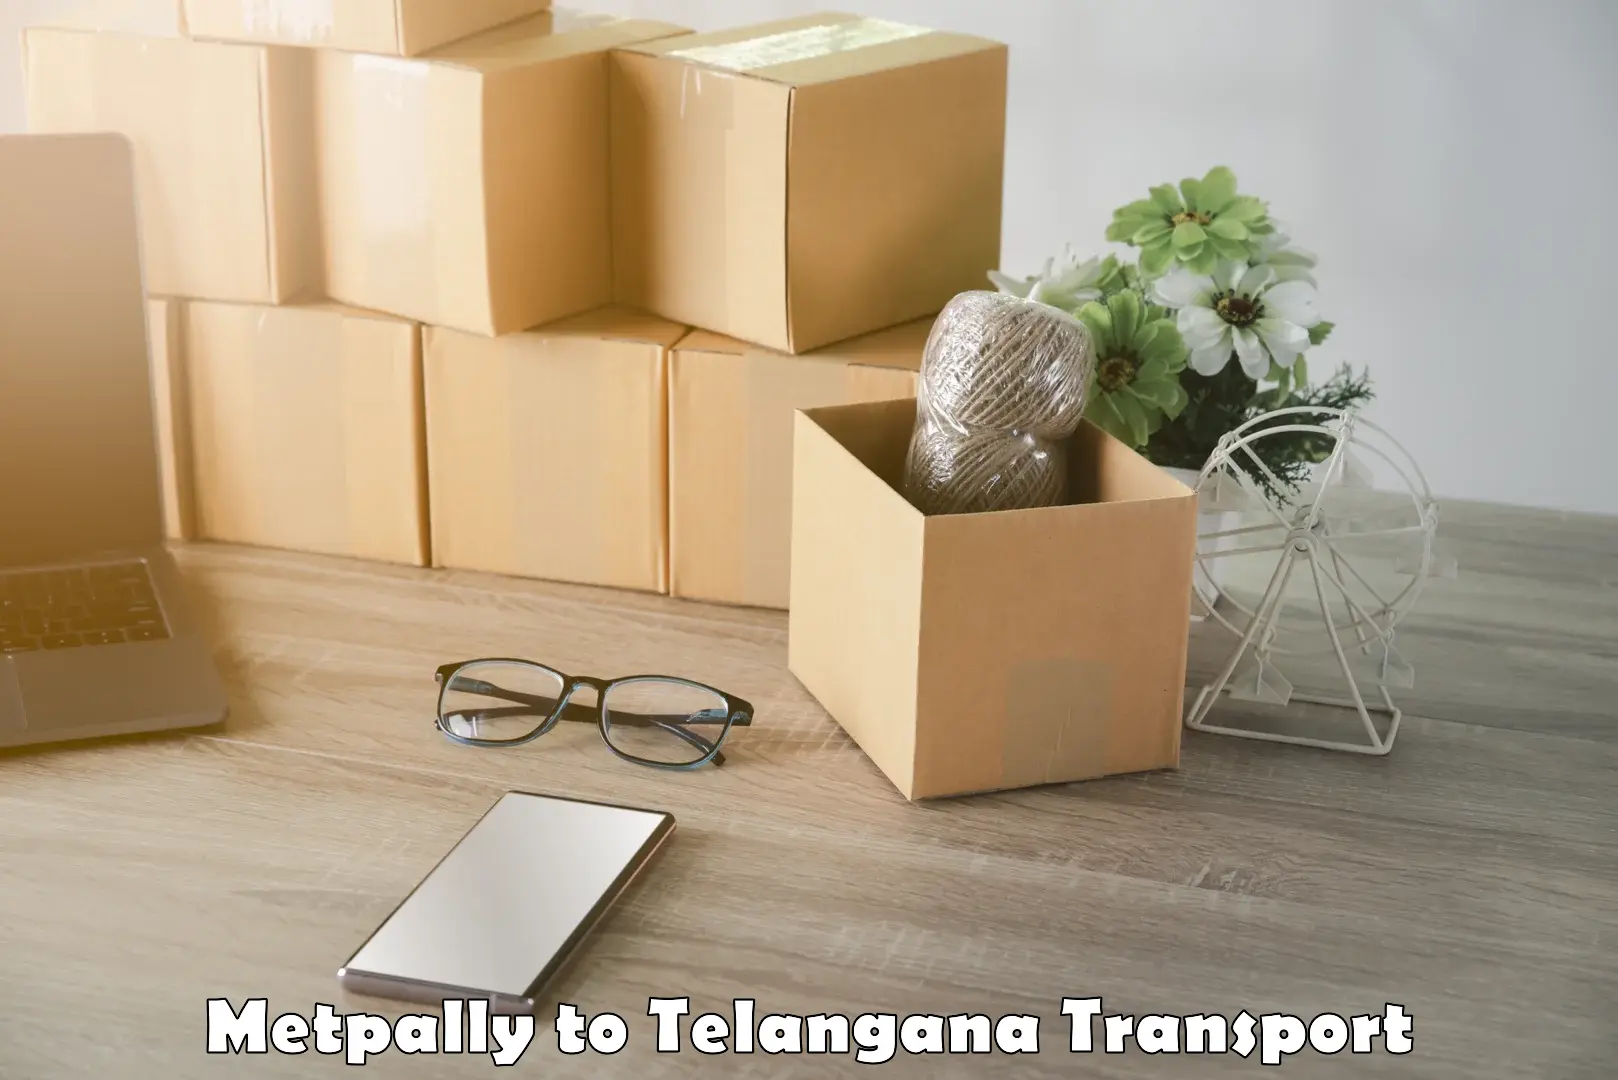 Daily parcel service transport Metpally to Telangana